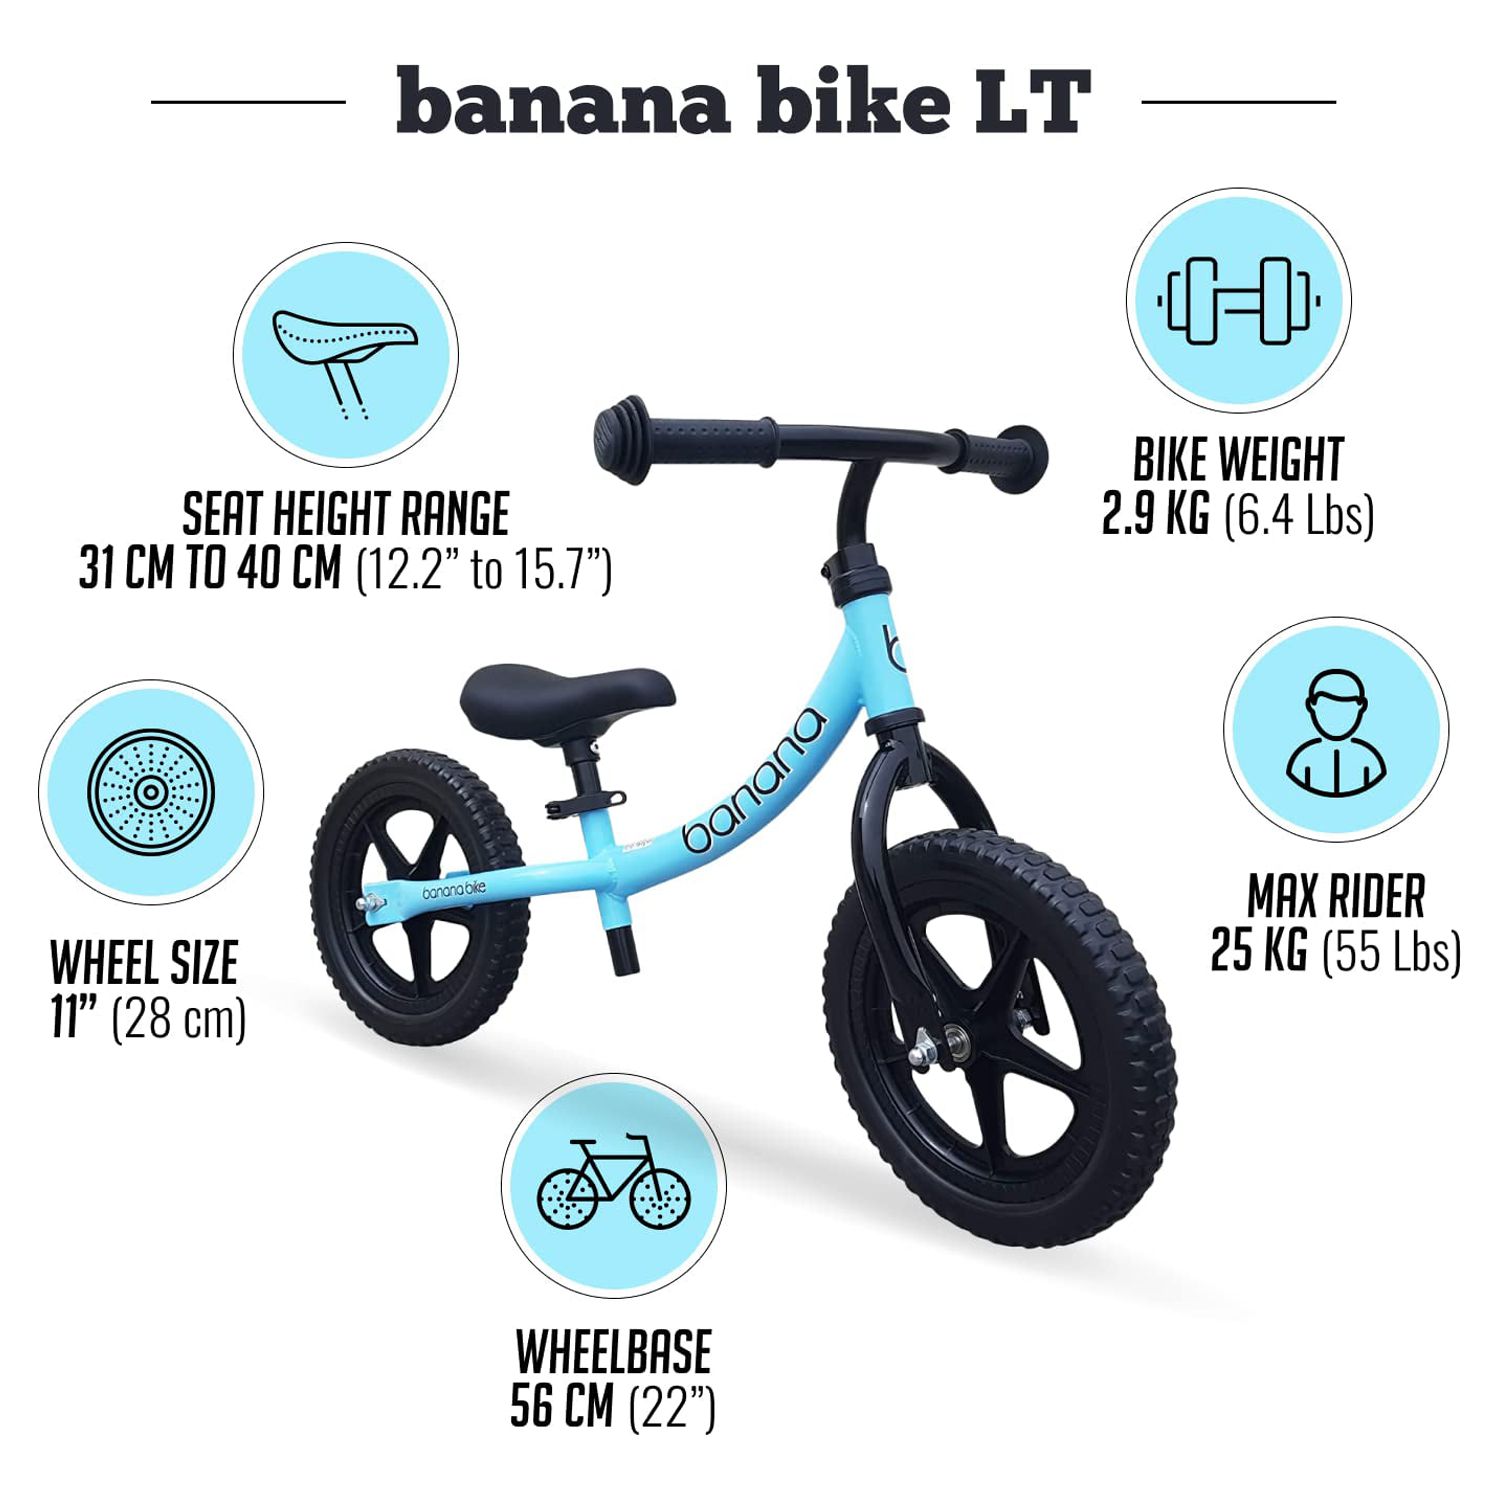 Banana LT Balance Bike - Lightweight Toddler Bike for 2, 3, 4, and 5 Year Old Boys and Girls - No Pedal Bikes for Kids with Adjustable Handlebar and seat - Aluminium, EVA Tires - Training Bike (Blue) - image 5 of 6